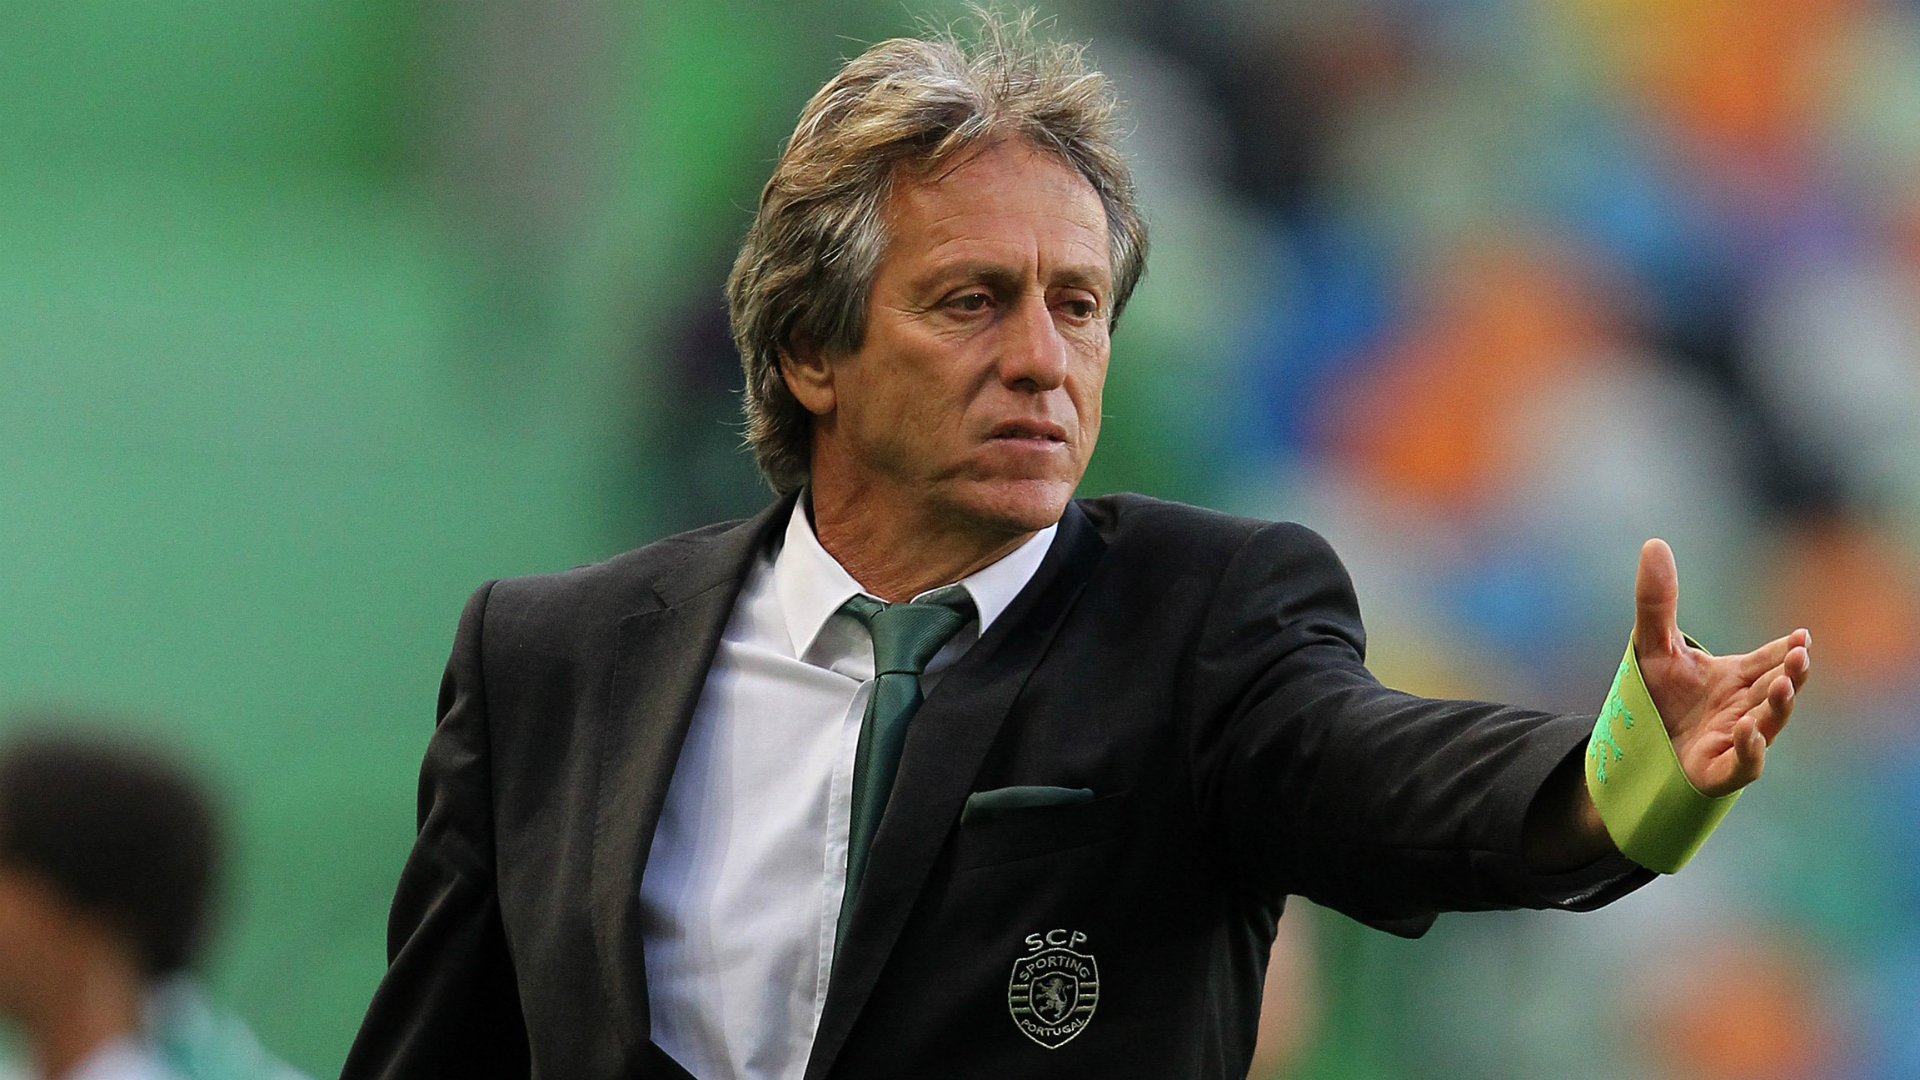 Jorge Jesus unveiled as Al-Hilal manager | beIN SPORTS